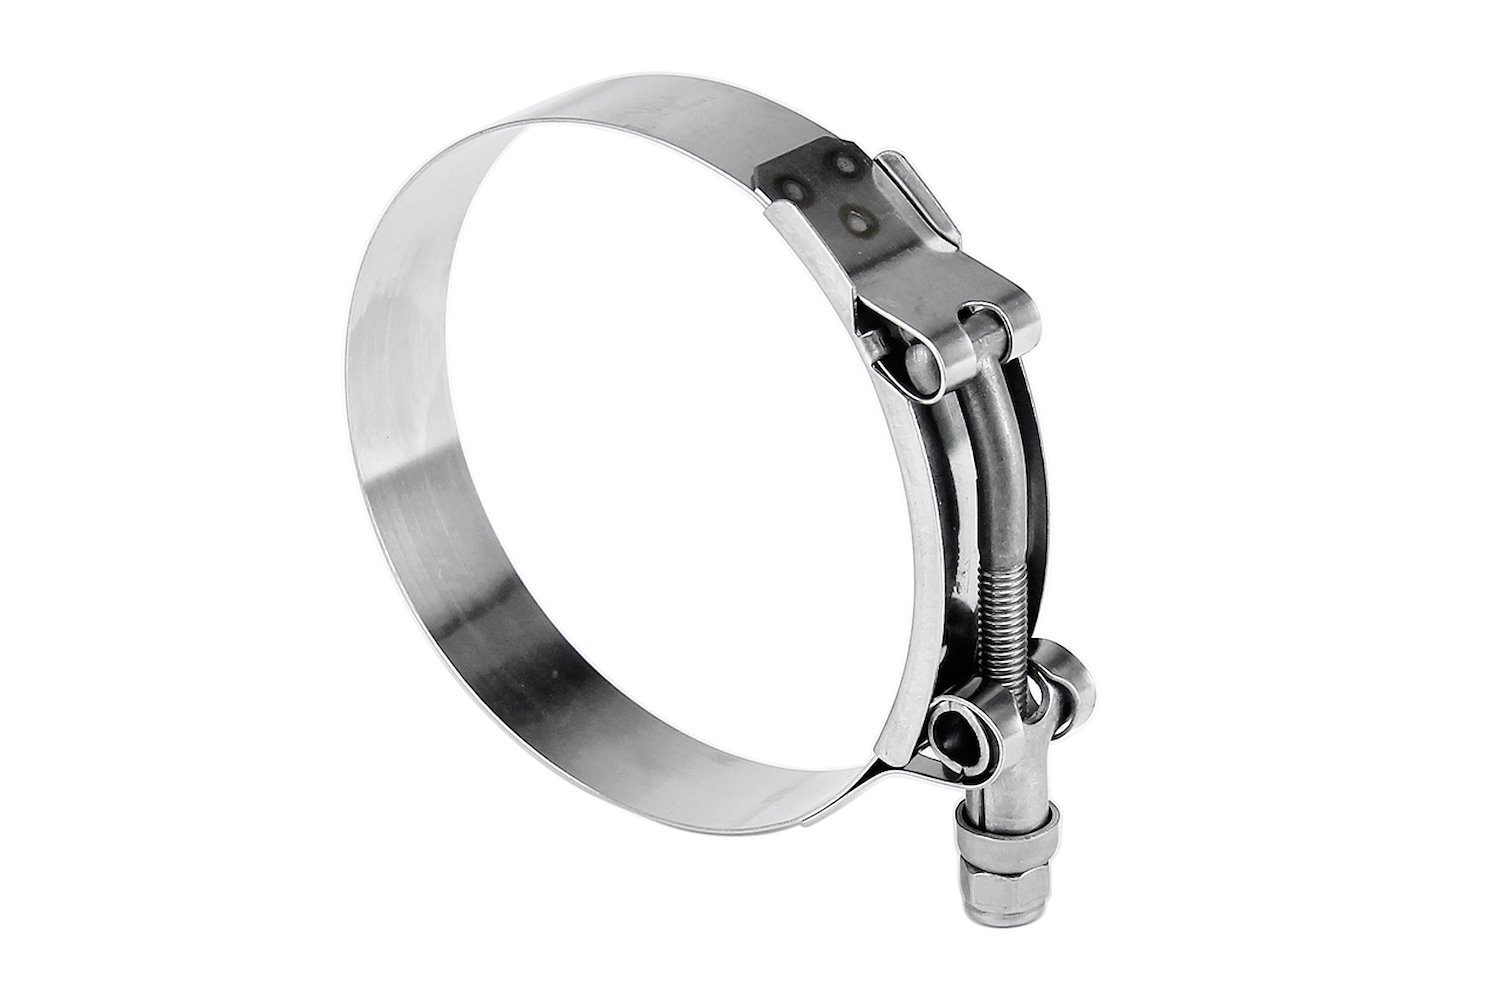 316-SSTC-165-173 100-Percent Marine Grade Stainless Steel T-Bolt Hose Clamp, Size #180, Range: 6.5 in.- 6.81 in.